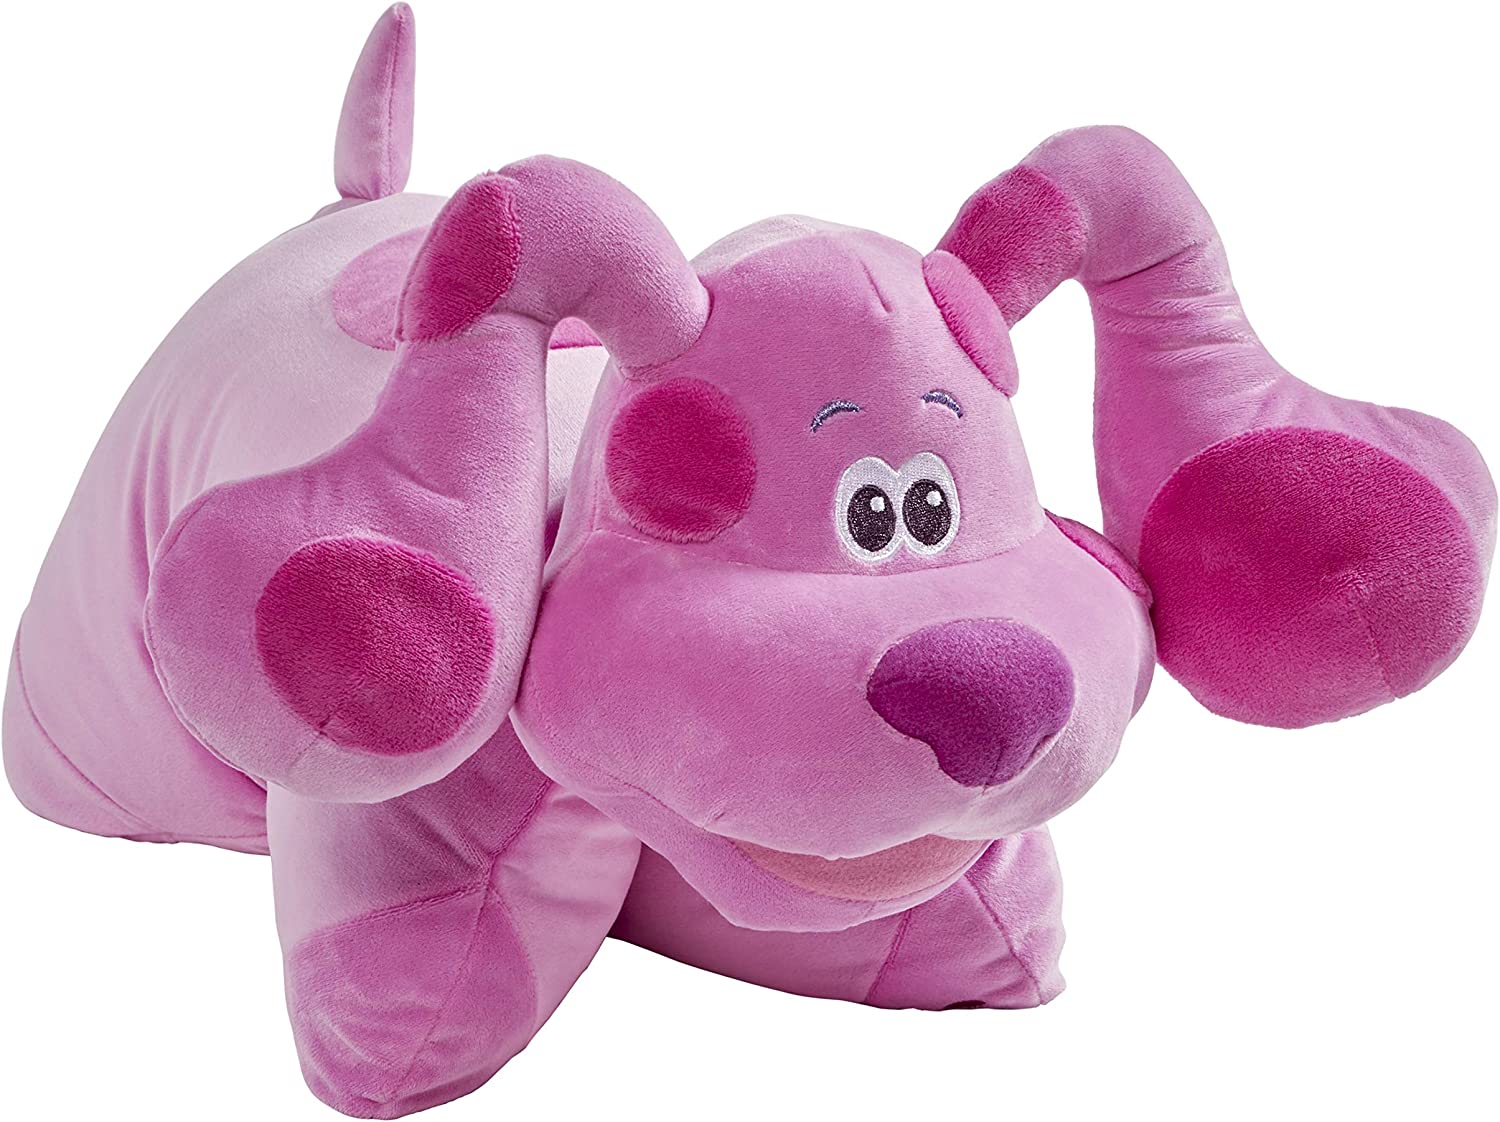 16” Blue's Clues Magenta Dog Plush Pillow Pet $10.50 + Free Shipping w/ Prime or on $25+